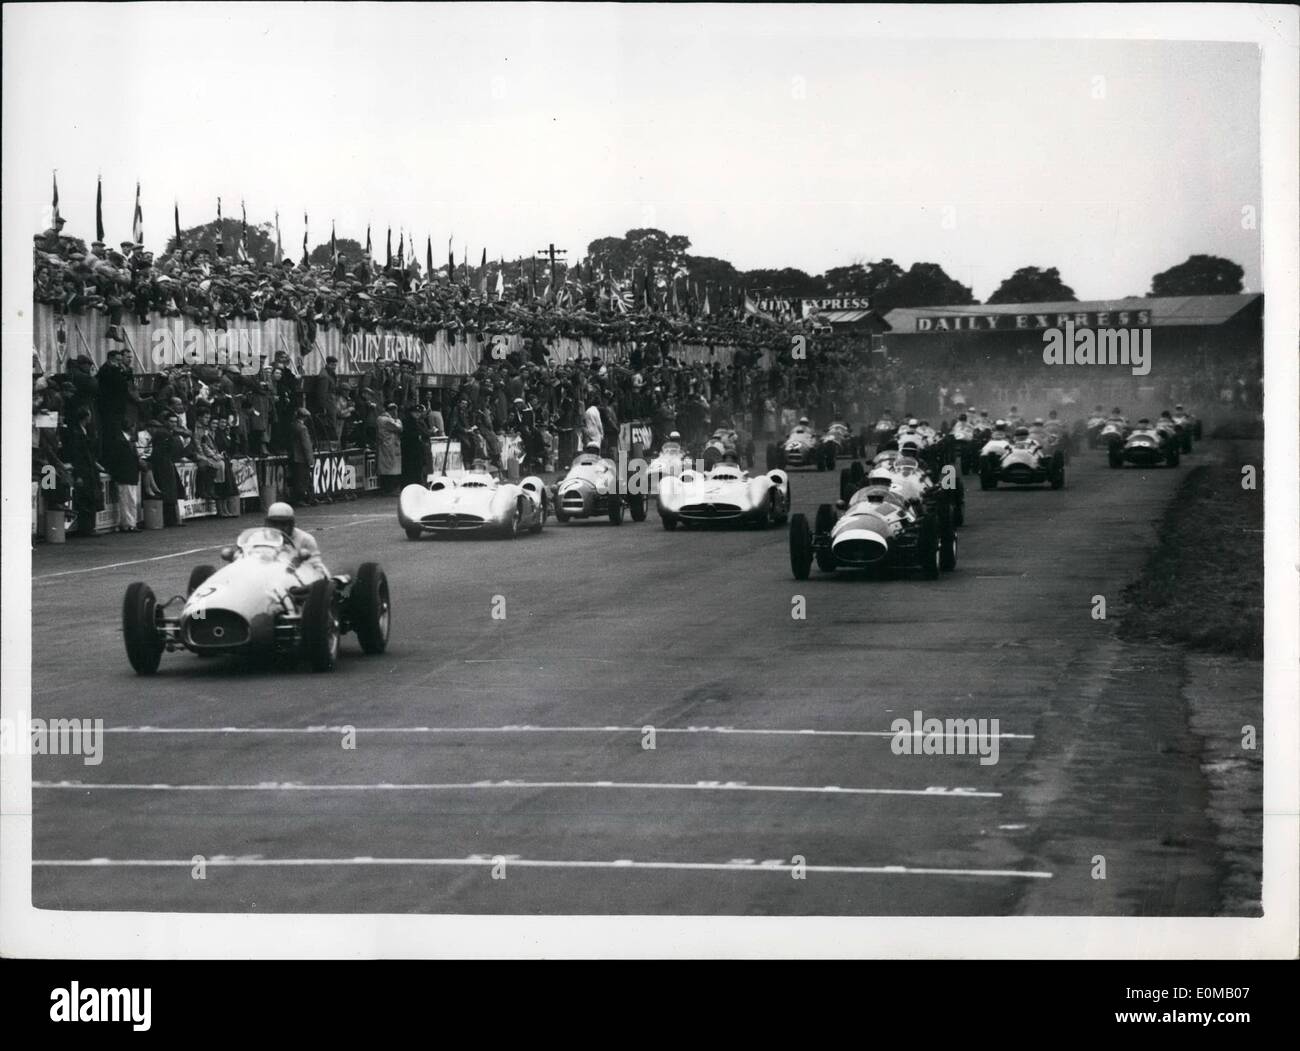 Jul. 07, 1954 - GONZALEZ WINS THE BRITISH GRAND PRIX AT SILVERSTONE.. MIKE HAWTHORN COMES SECOND.. Gonzales the Argentine champion driving an Italian Ferrari - won the British Grand Prix at Silverstone this afternoon after a great tussle with Mike Hawthorn of British who was also driving a Ferrari - and who came in second place. O. Marimon driving a Maseratti came third and J.M. Fangio (Mercedes Benz) took fourth place.. Keystone Photo Shows:- General view of the start of the British Grand Prix at Silverstone this afternoon. Stock Photo